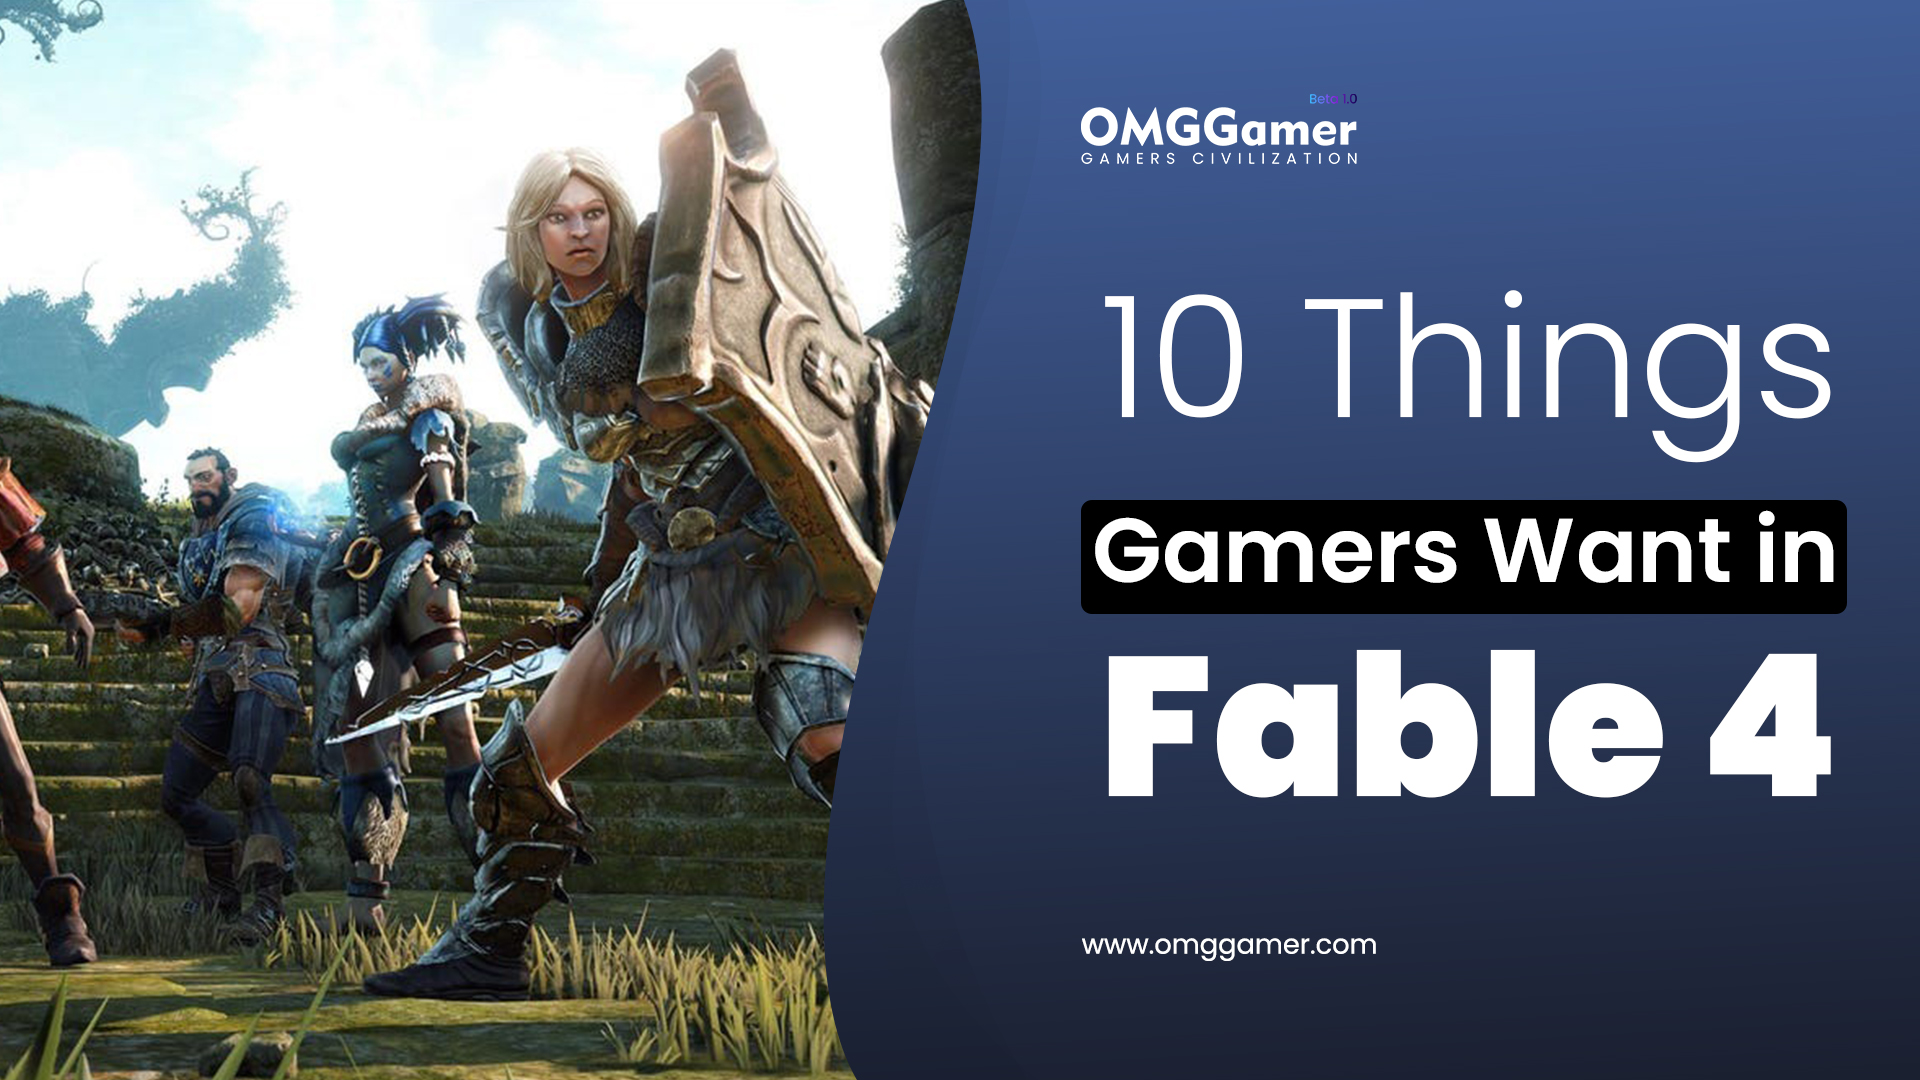 Fable 4 Expectations: 10 Things Gamers Want in Fable 4